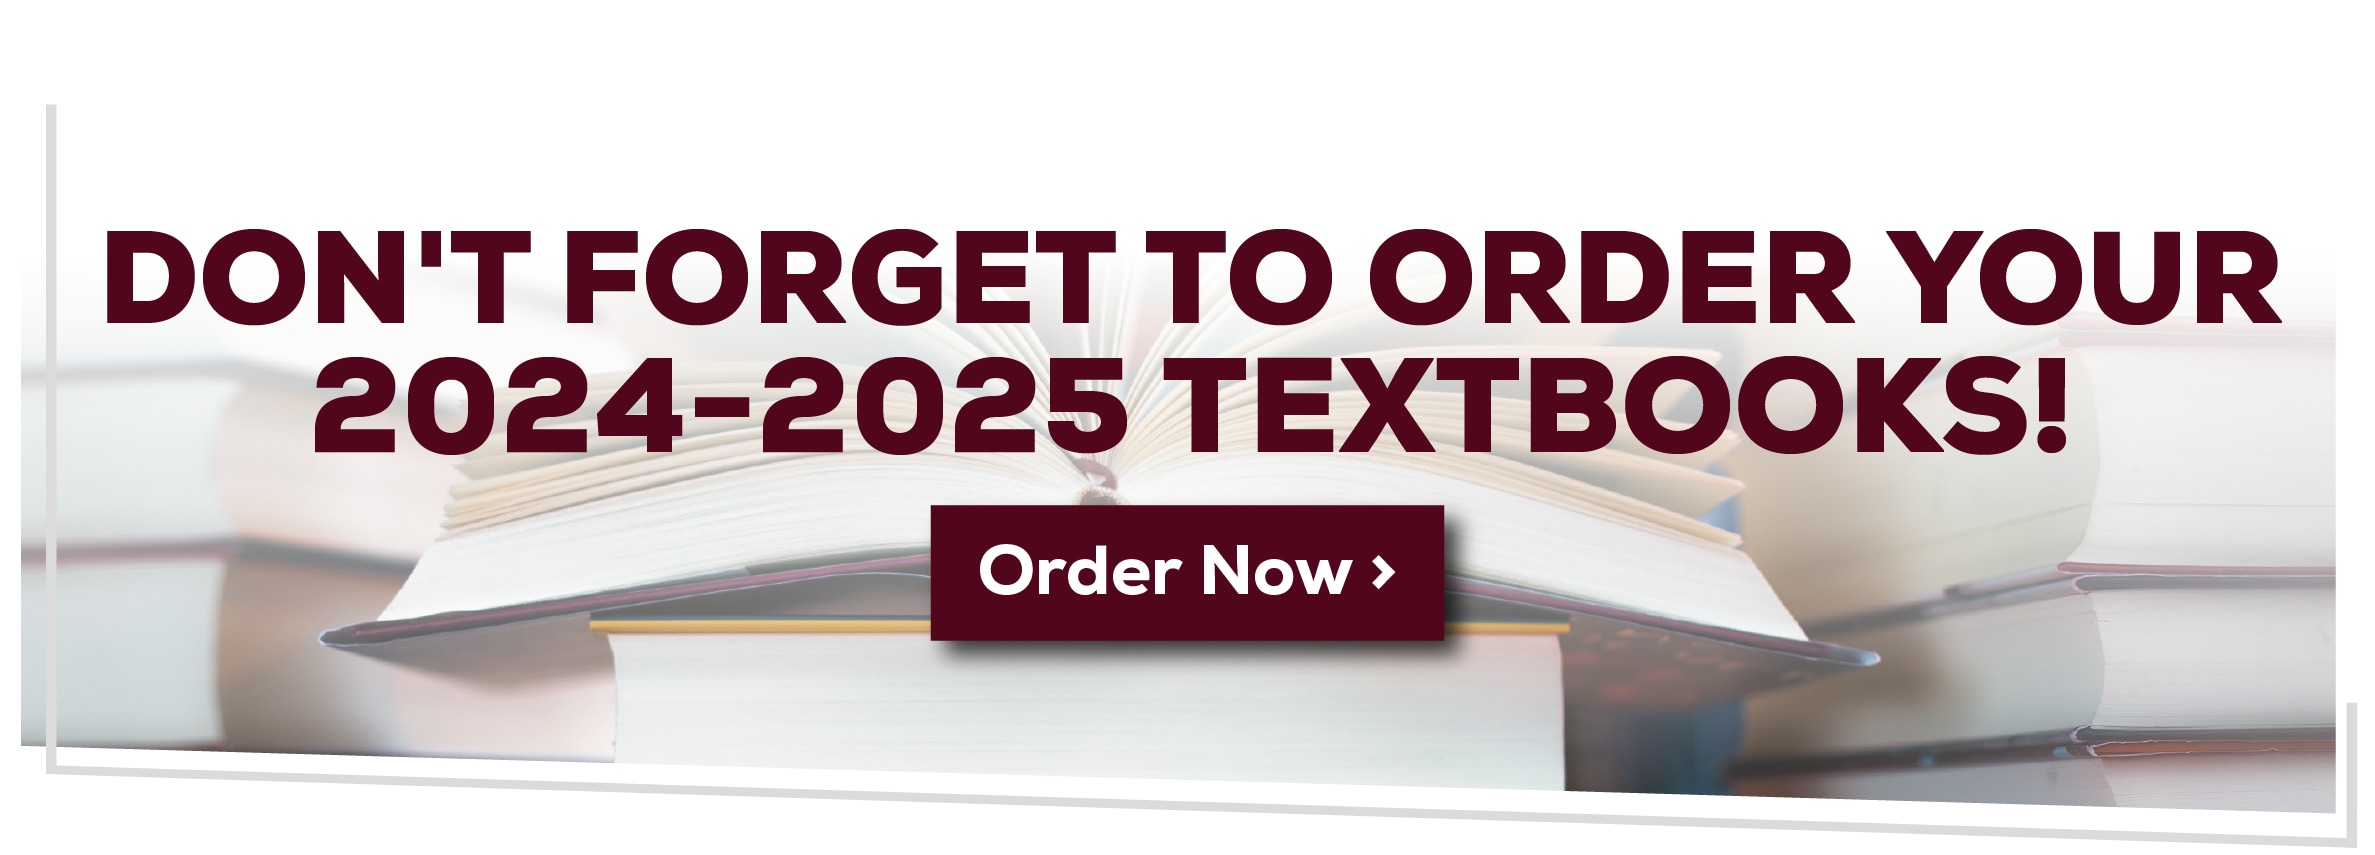 DON'T FORGET TO ORDER YOUR 2024-2025 TEXTBOOKS! Order Now >